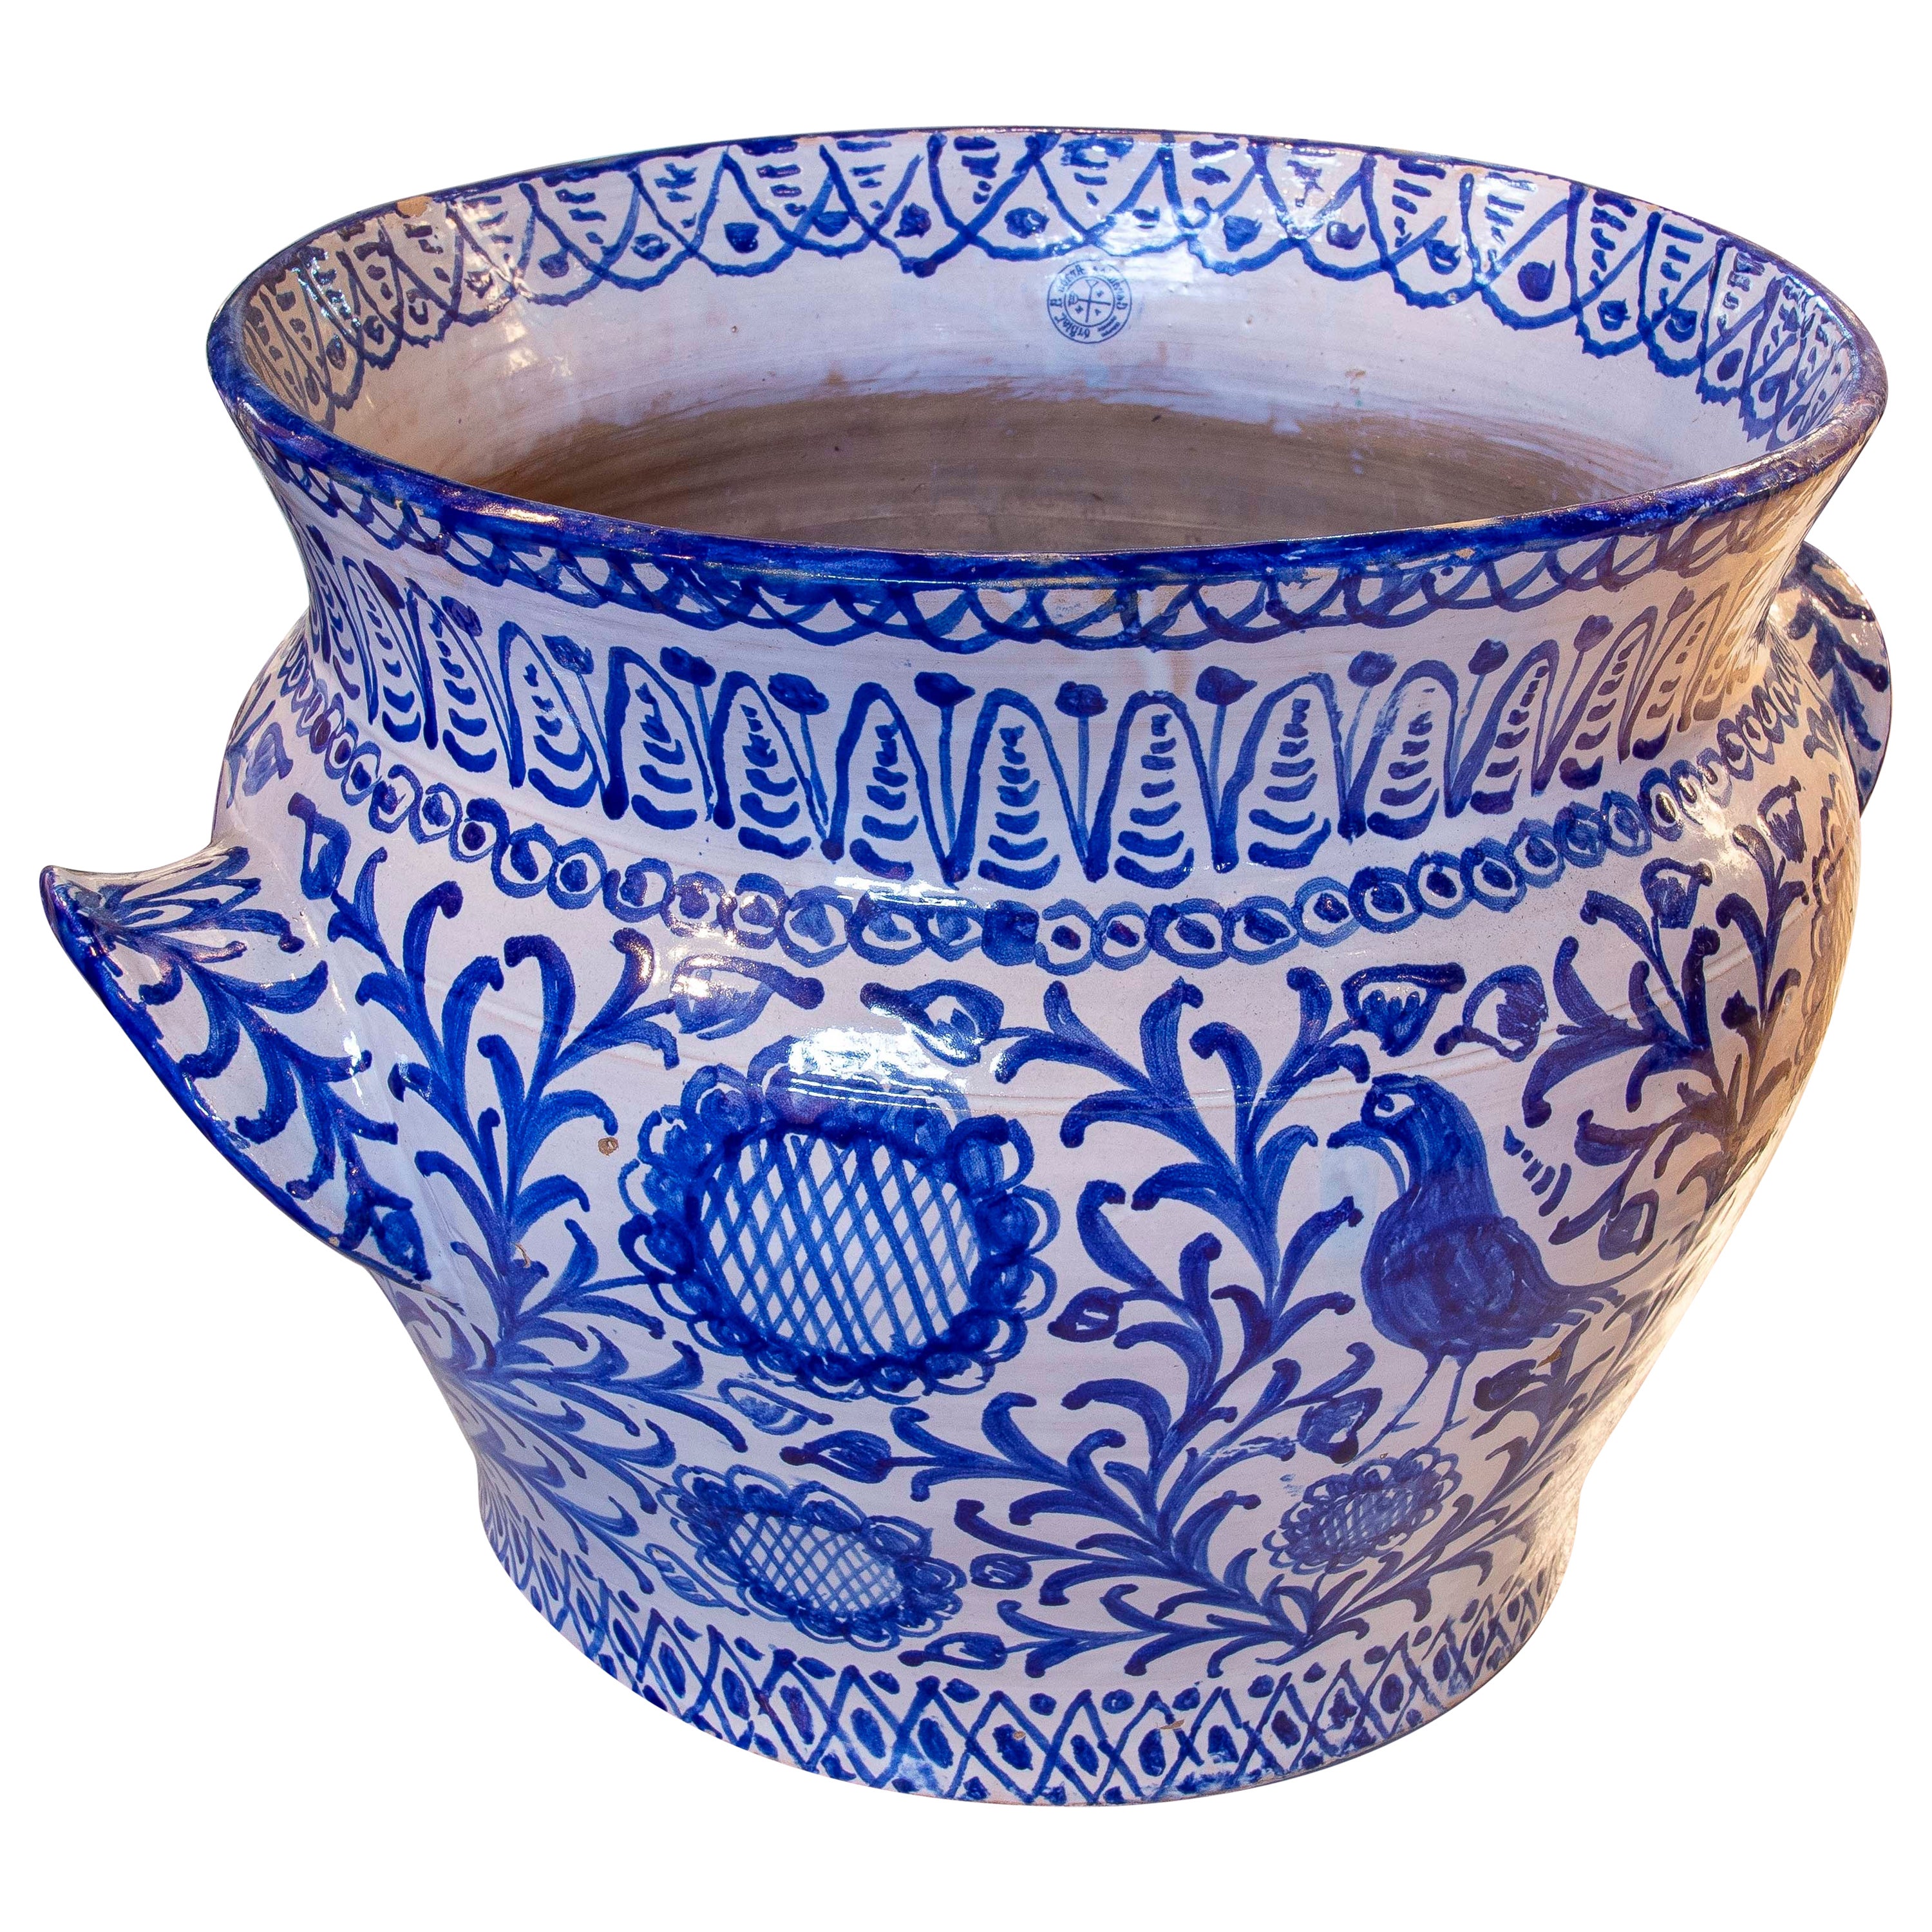 Spanish Typical Glazed Ceramic Pot in Blue and White Tones